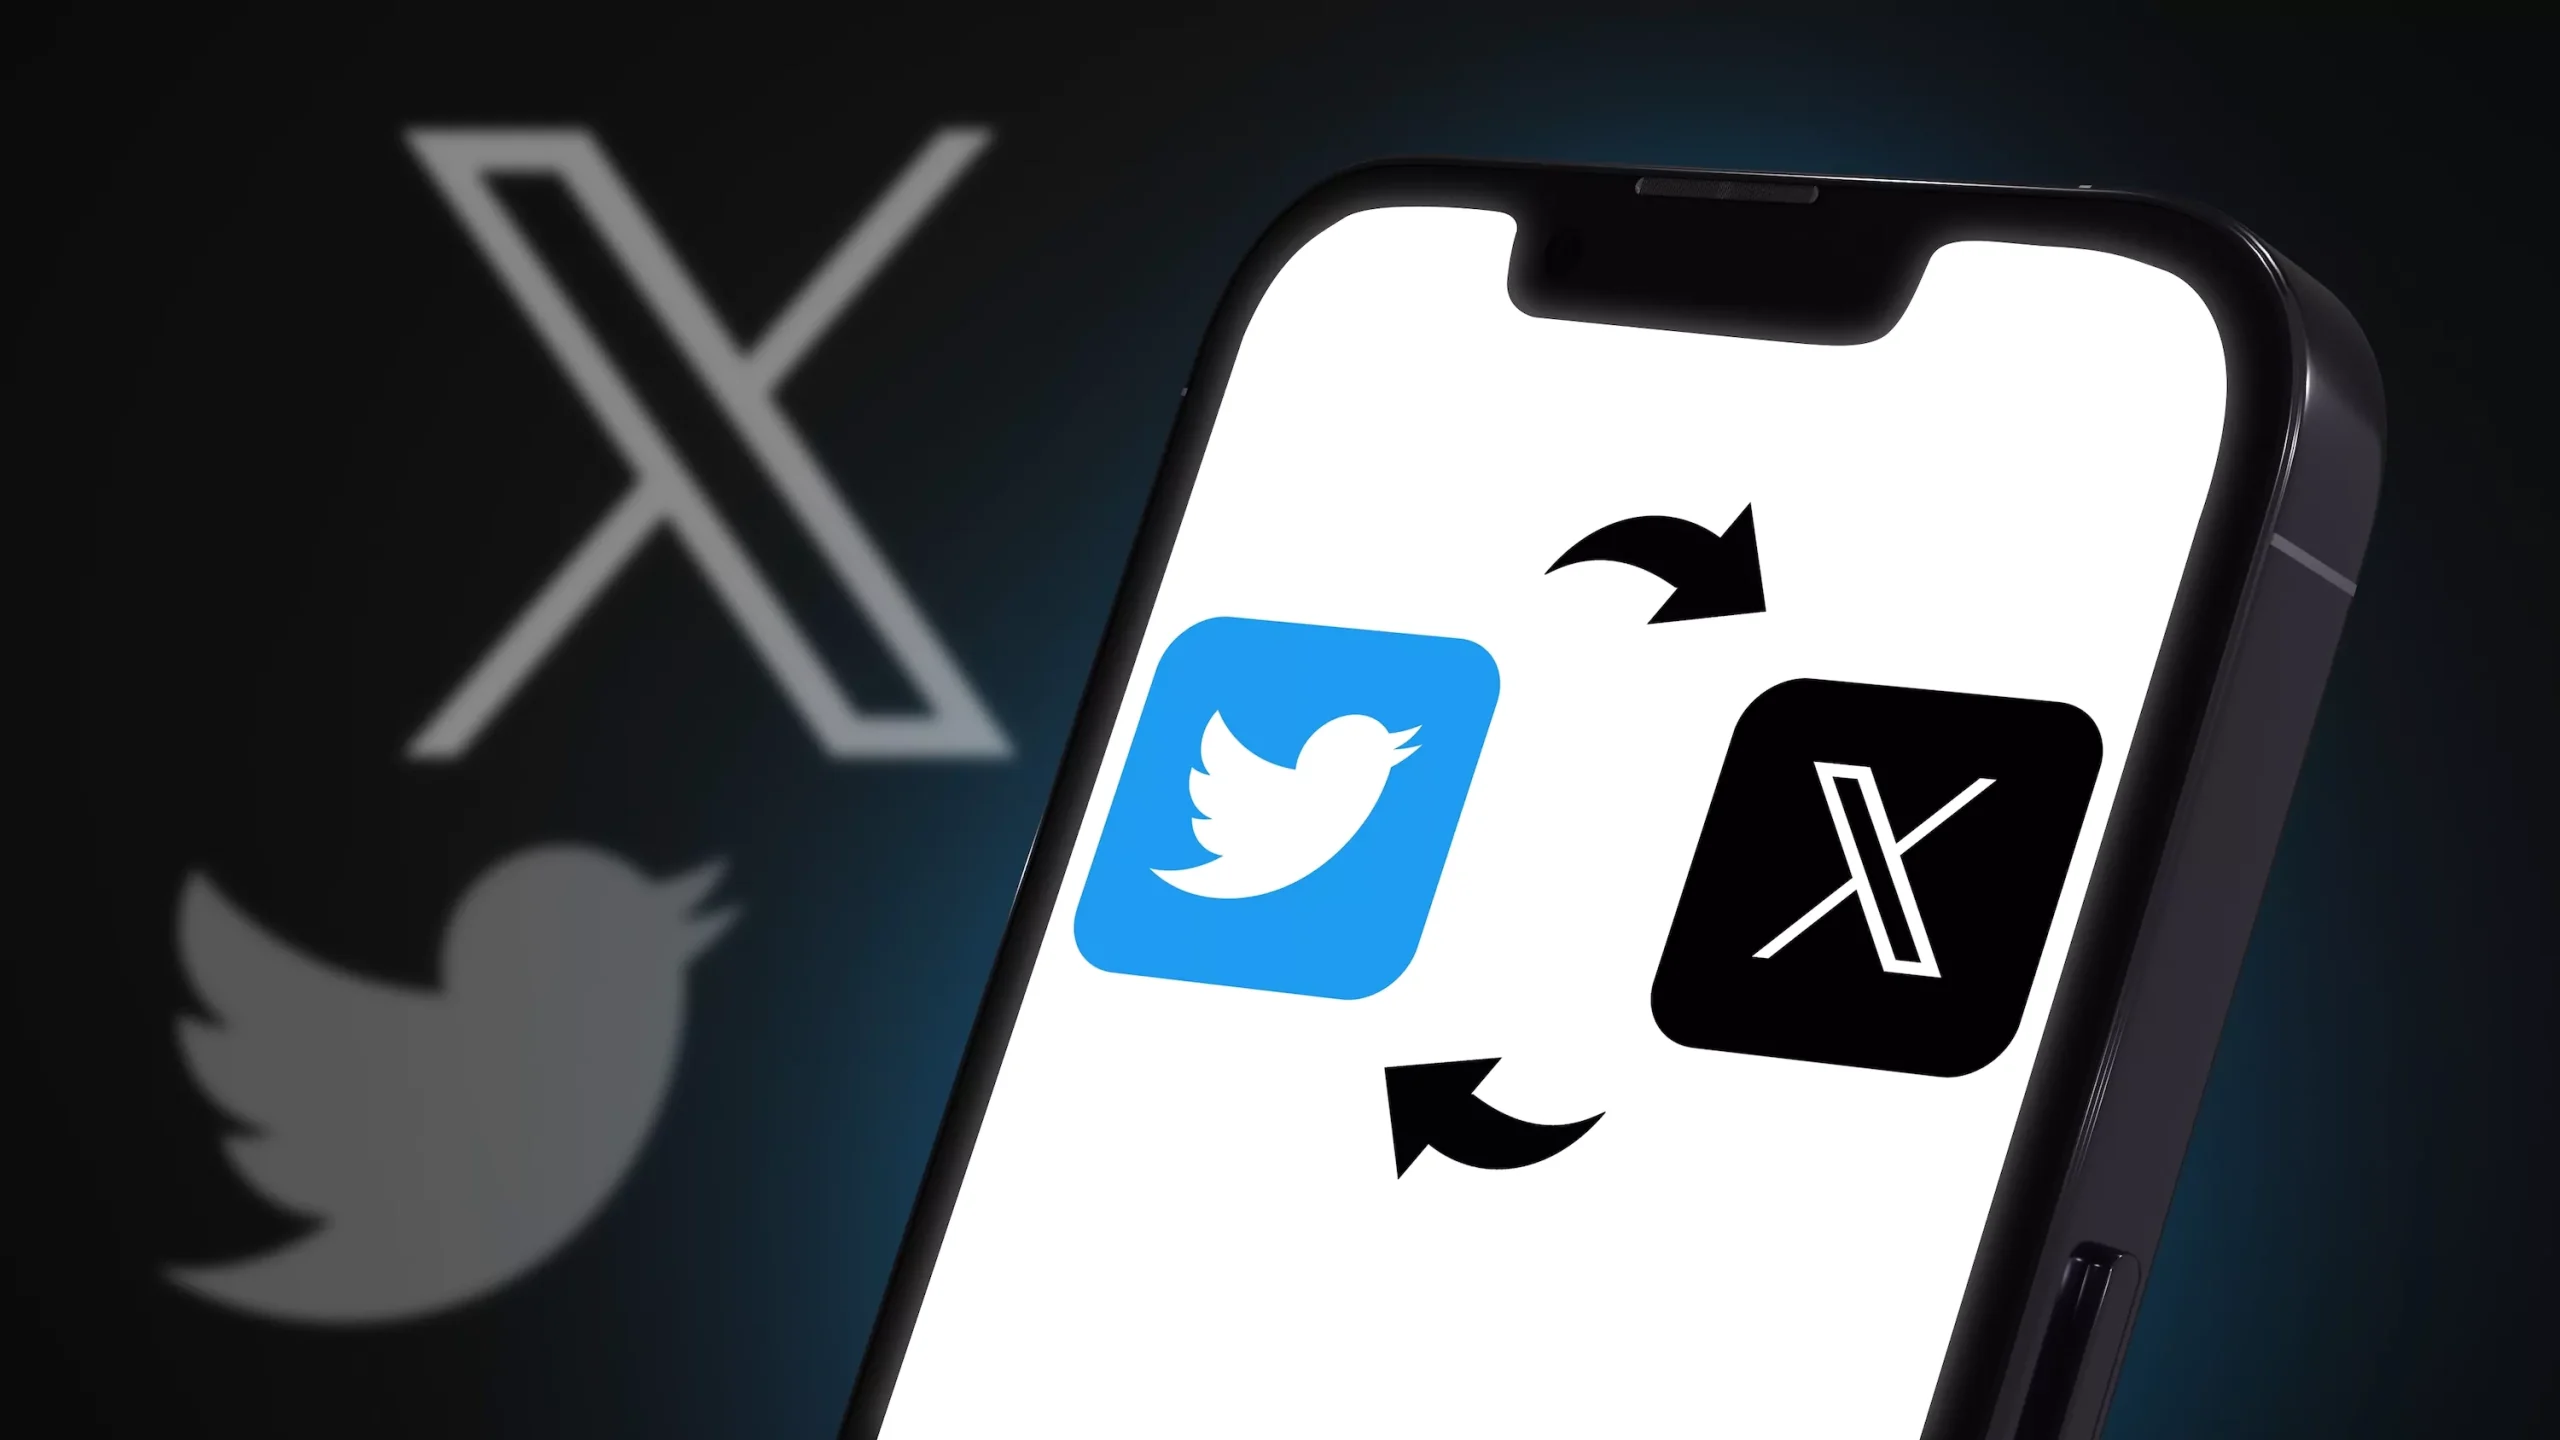 From Twitter to X: What’s in a name?